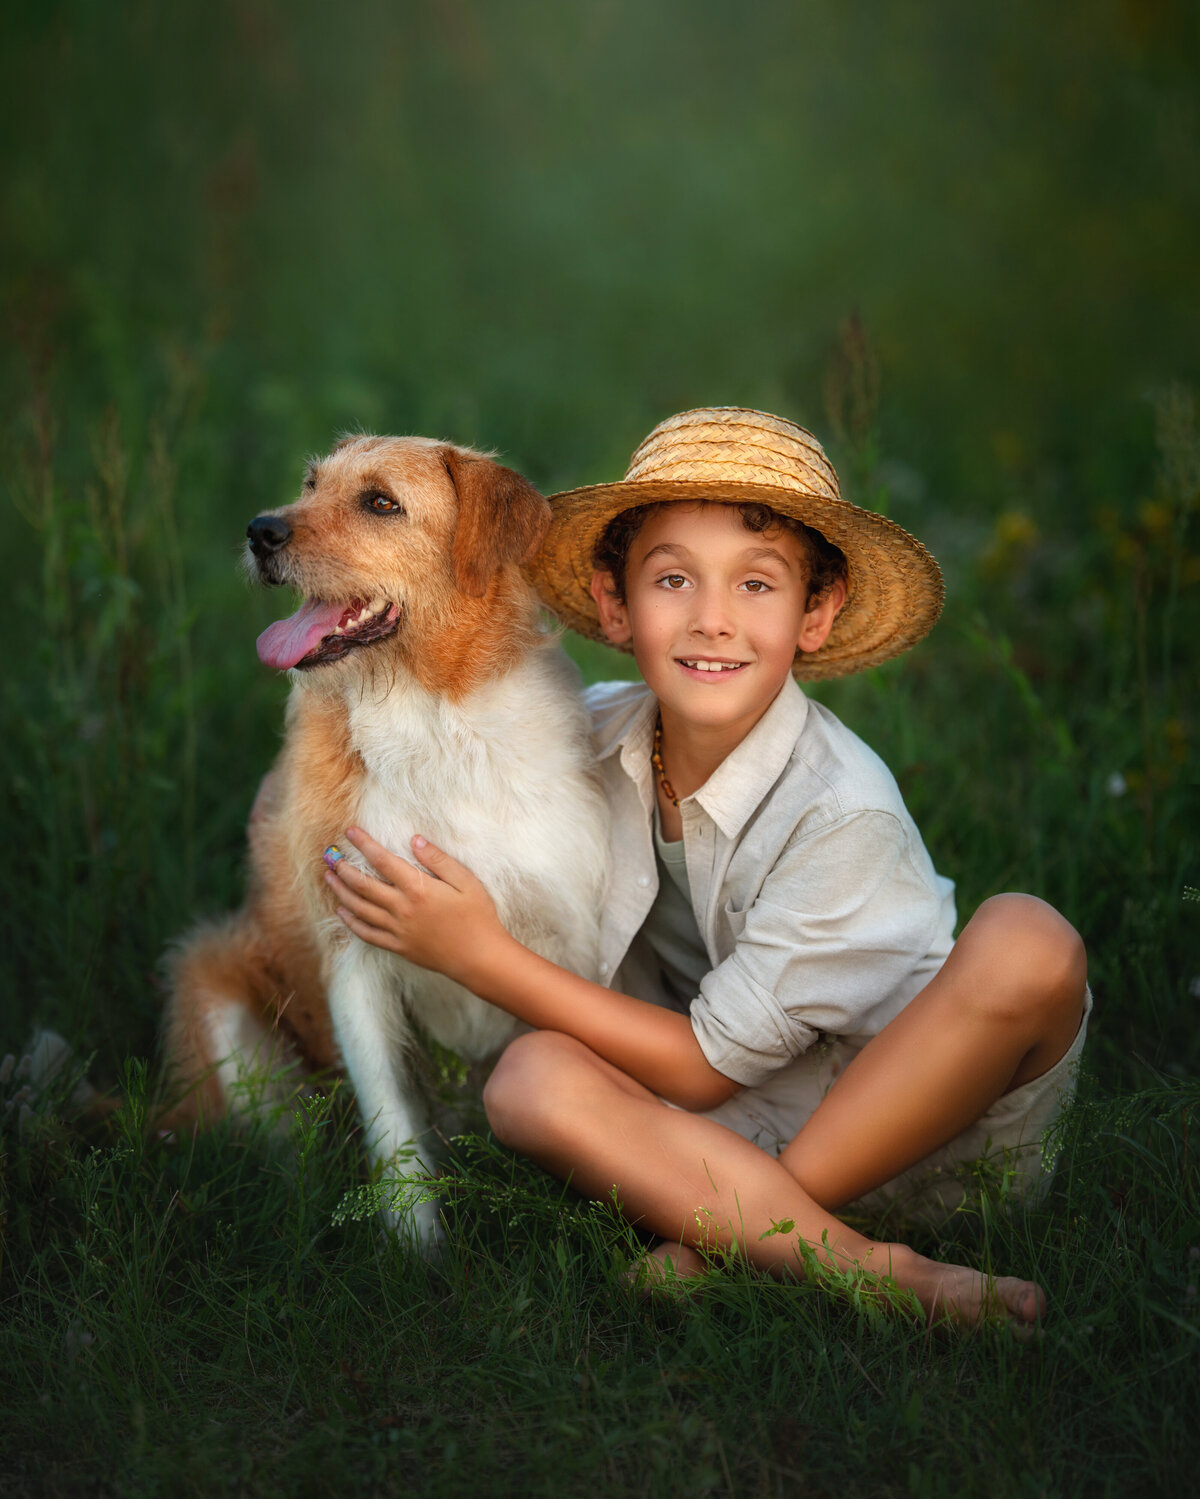 Kid in linen outfit and straw hat holding  scruffy farm dog